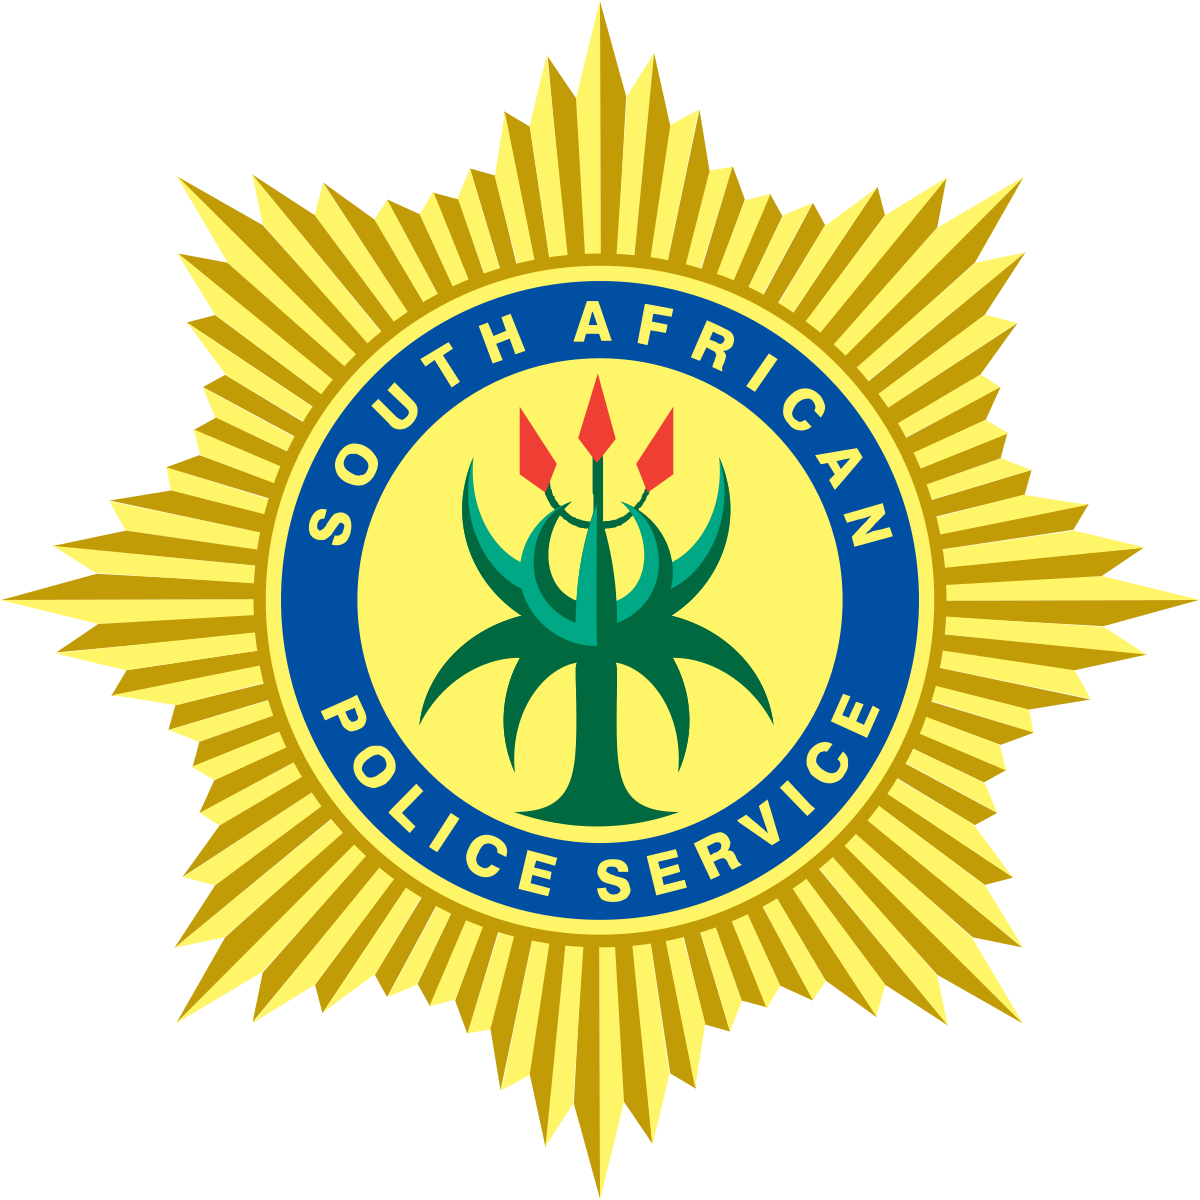 SECRETARY SOUTH AFRICAN POLICE SERVICE